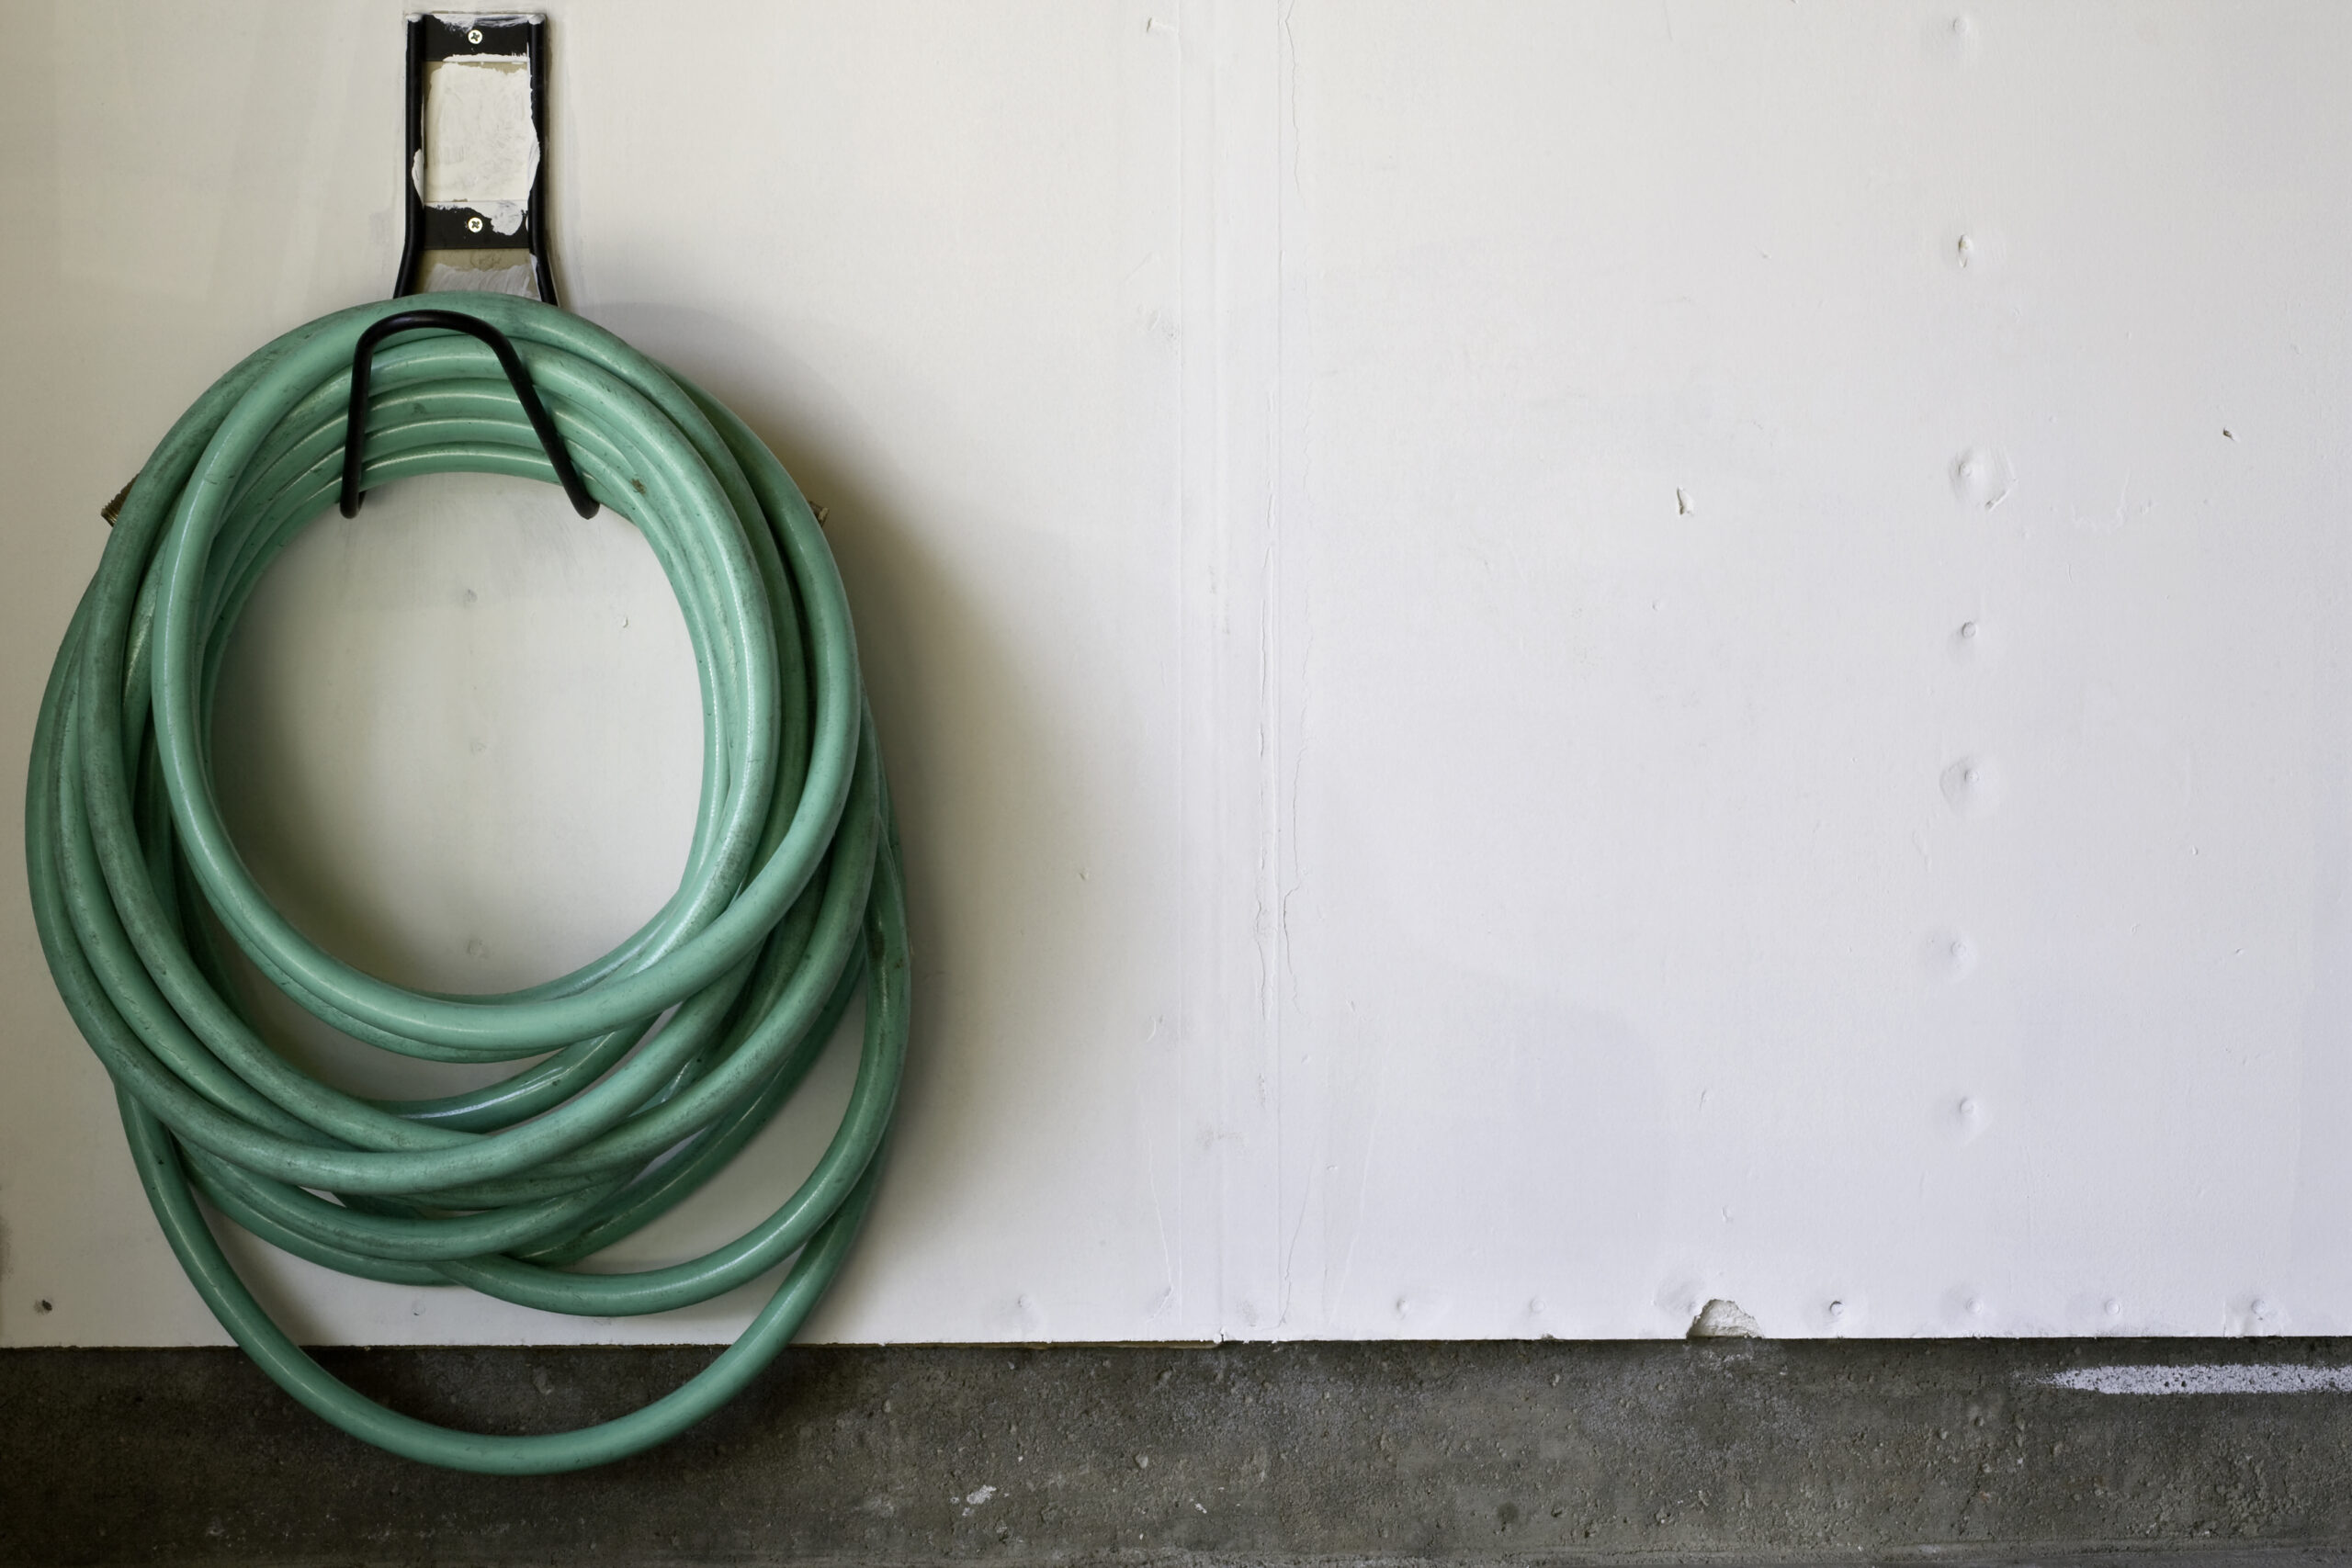 A green garden hose hanging on the garage wall